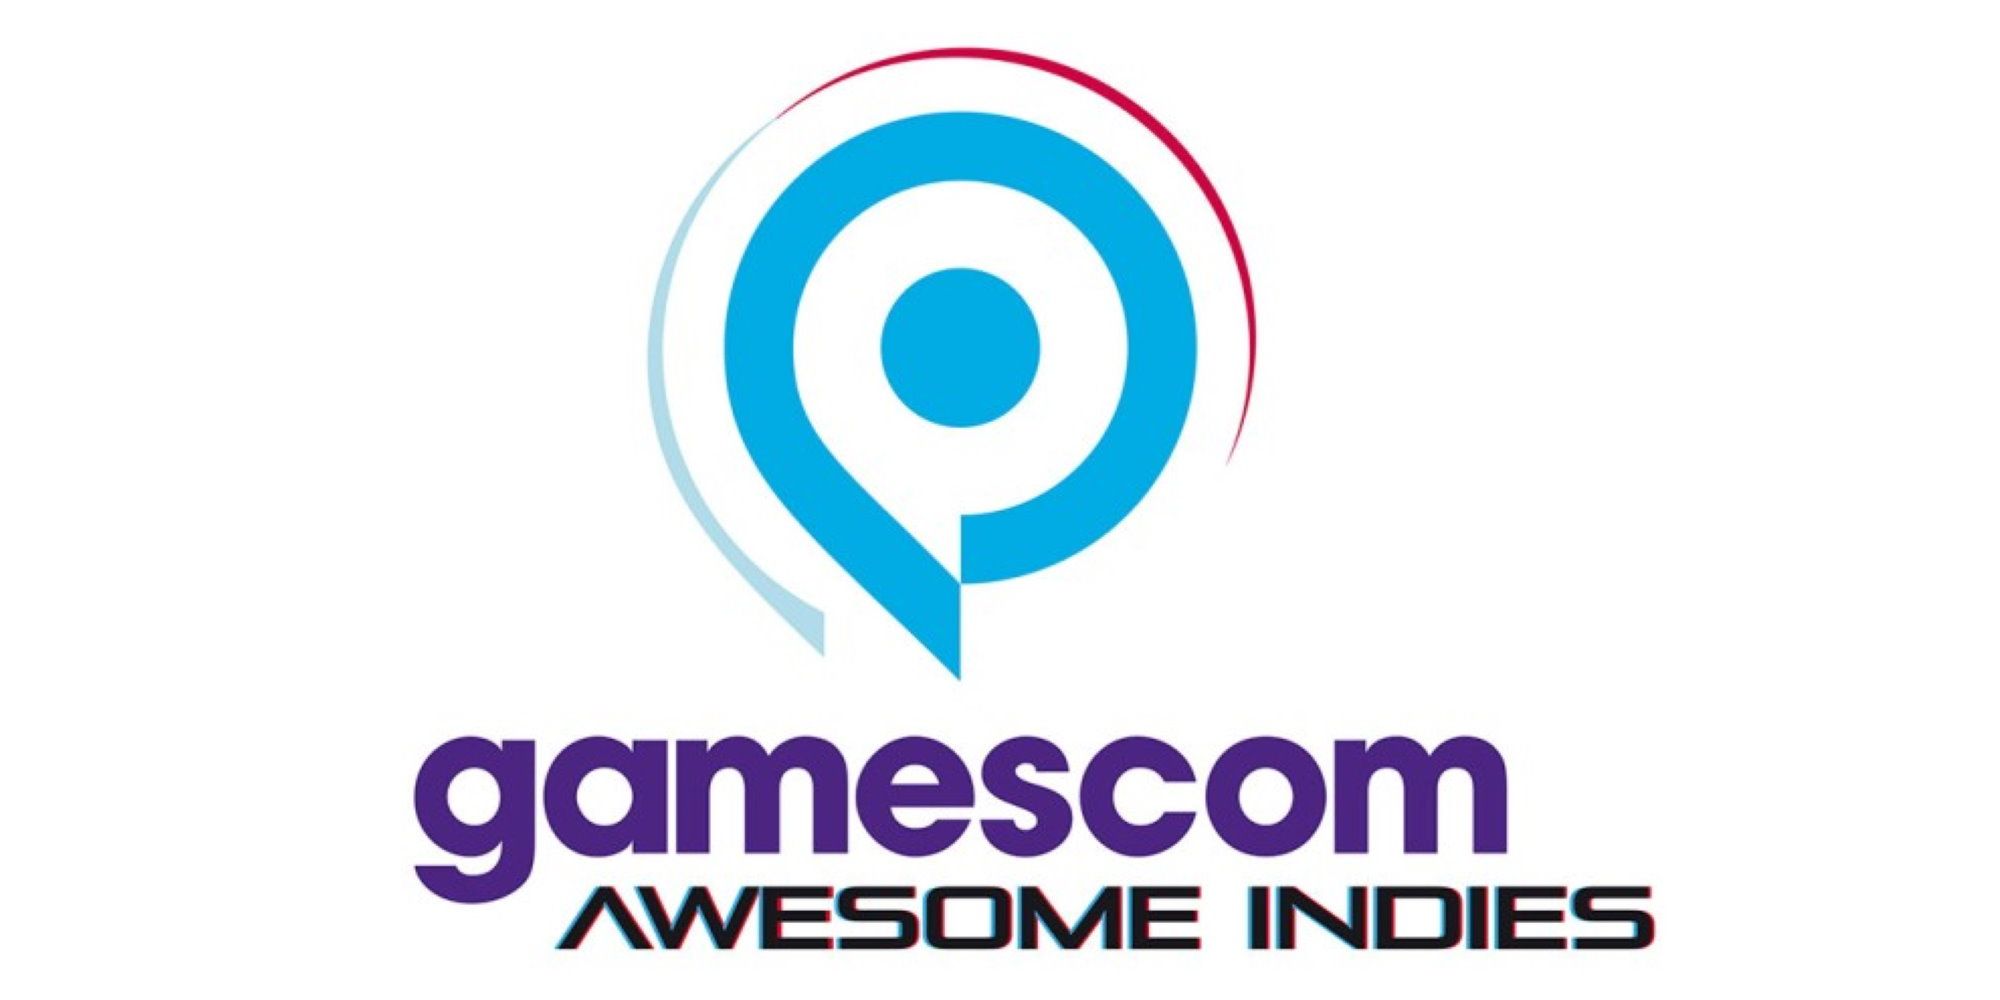 Gamescom Awesome Indies